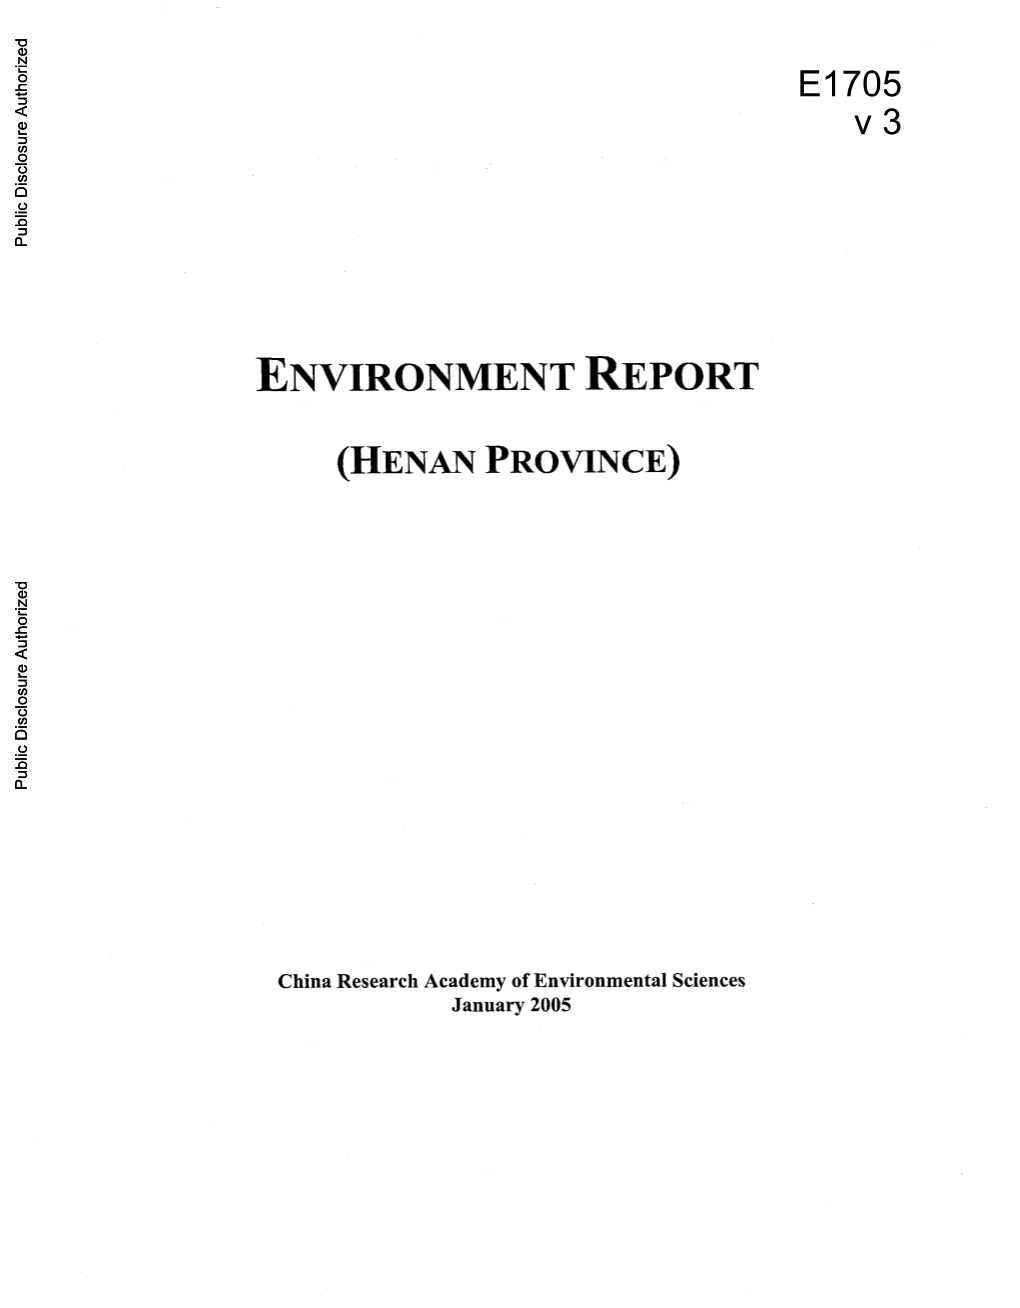 Environmental Monitoring for Five Consecutive Years on the Environmental Impacts Due to Project Implementation